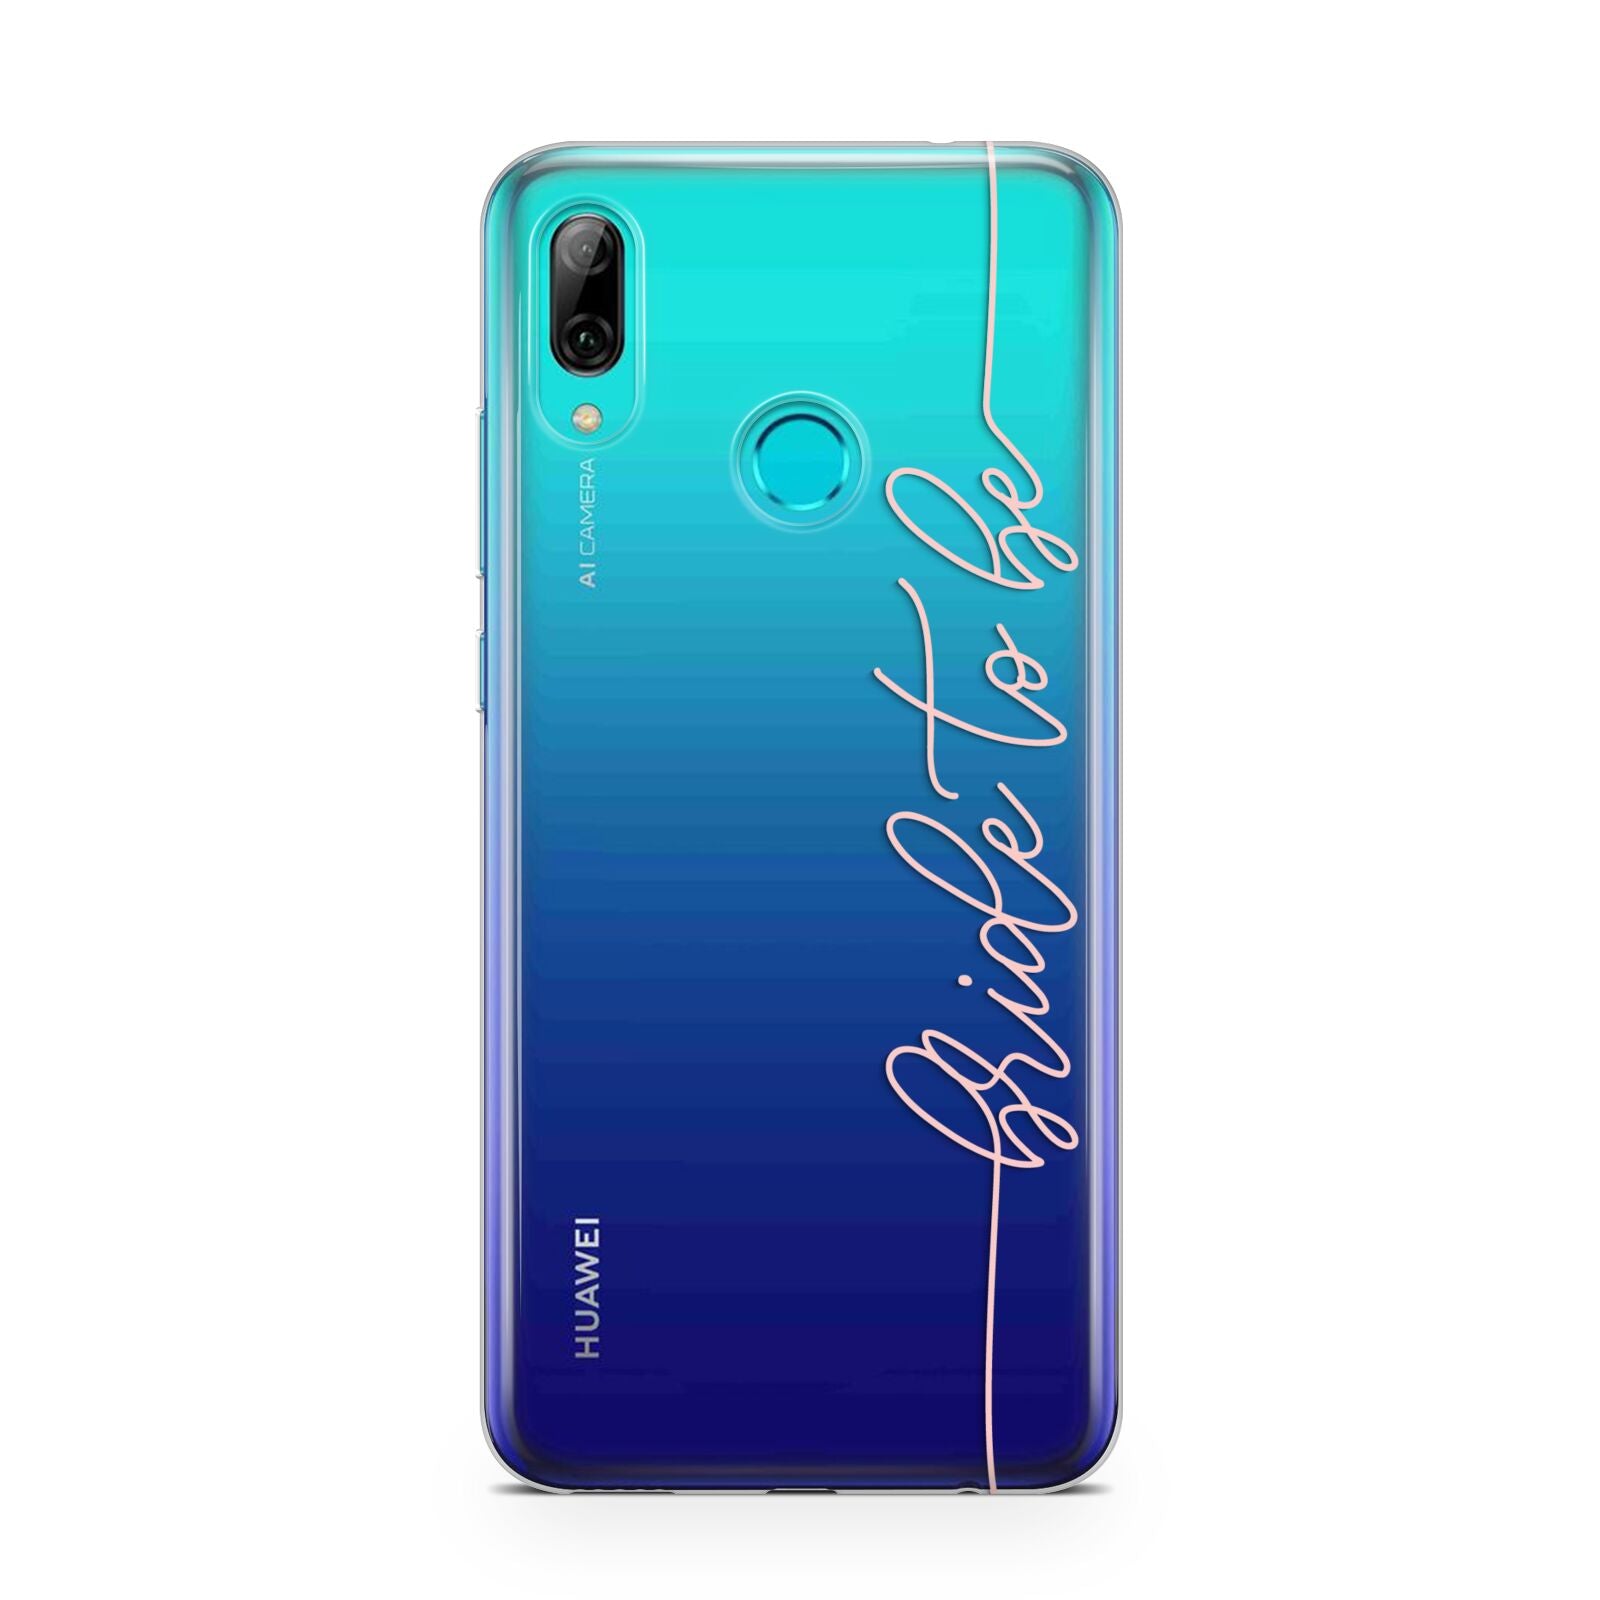 Bride To Be Huawei P Smart 2019 Case